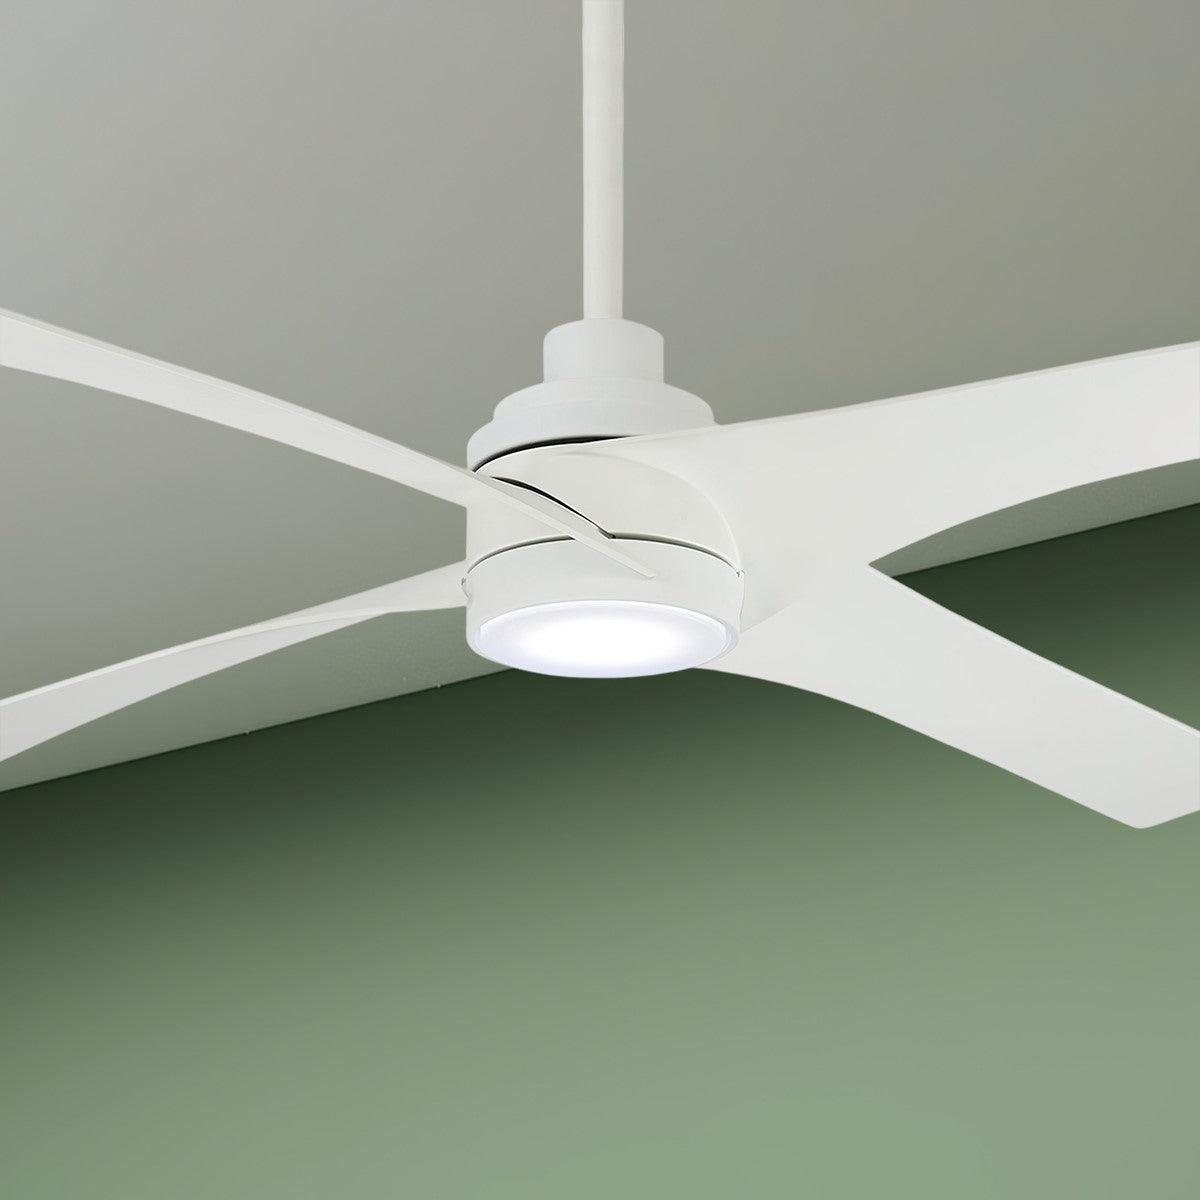 Swept 56 Inch Contemporary Ceiling Fan With Light And Remote